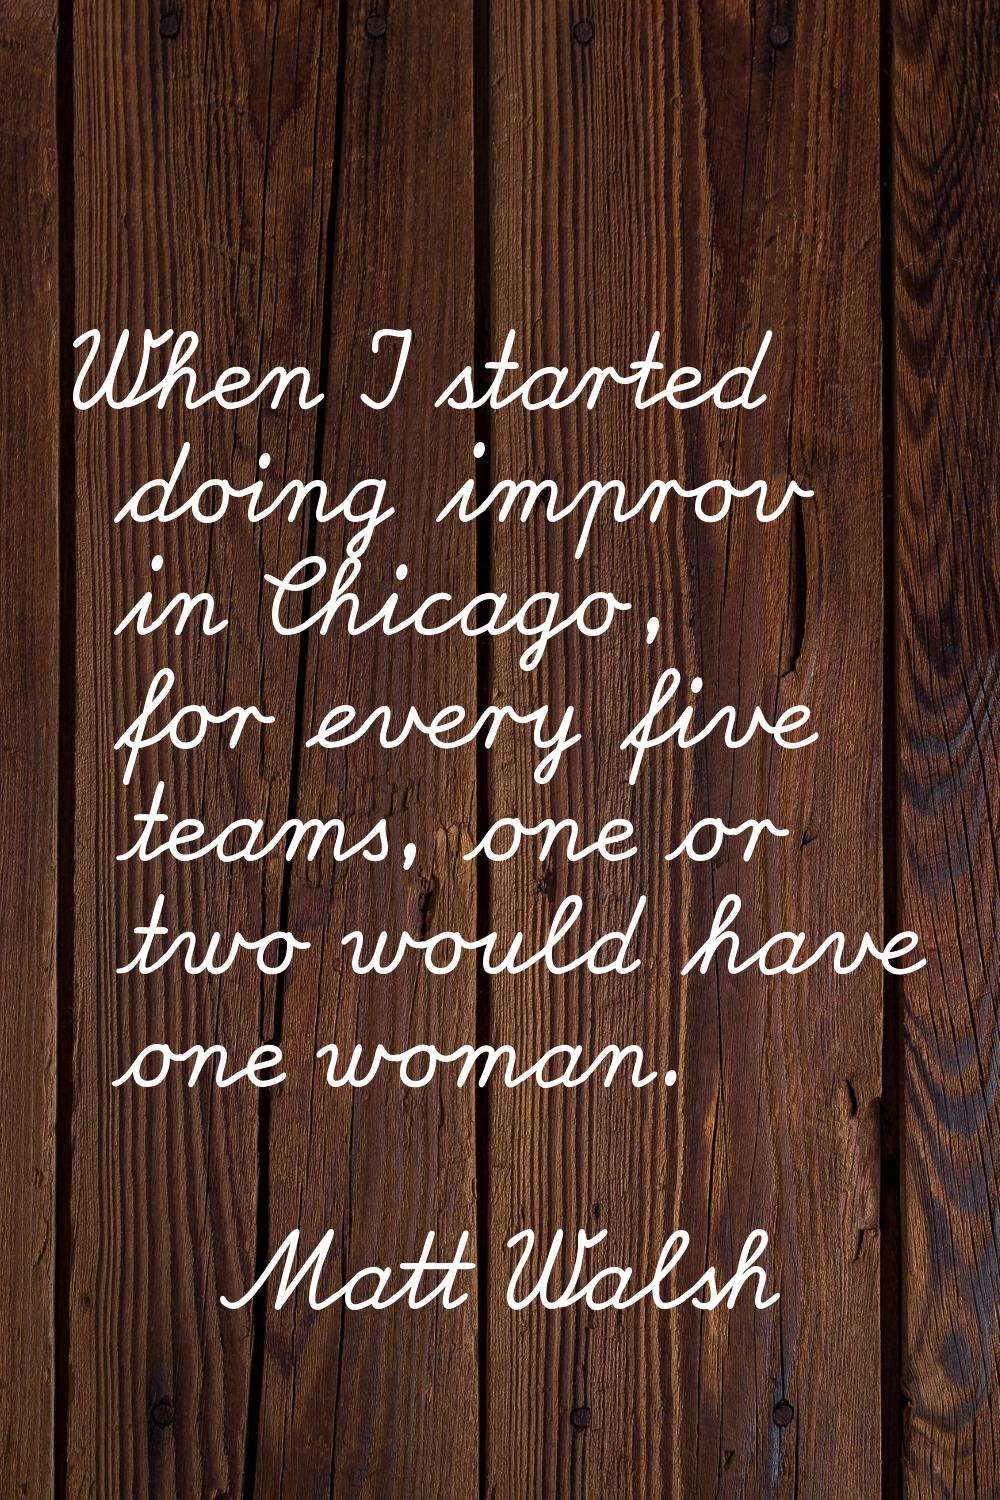 When I started doing improv in Chicago, for every five teams, one or two would have one woman.